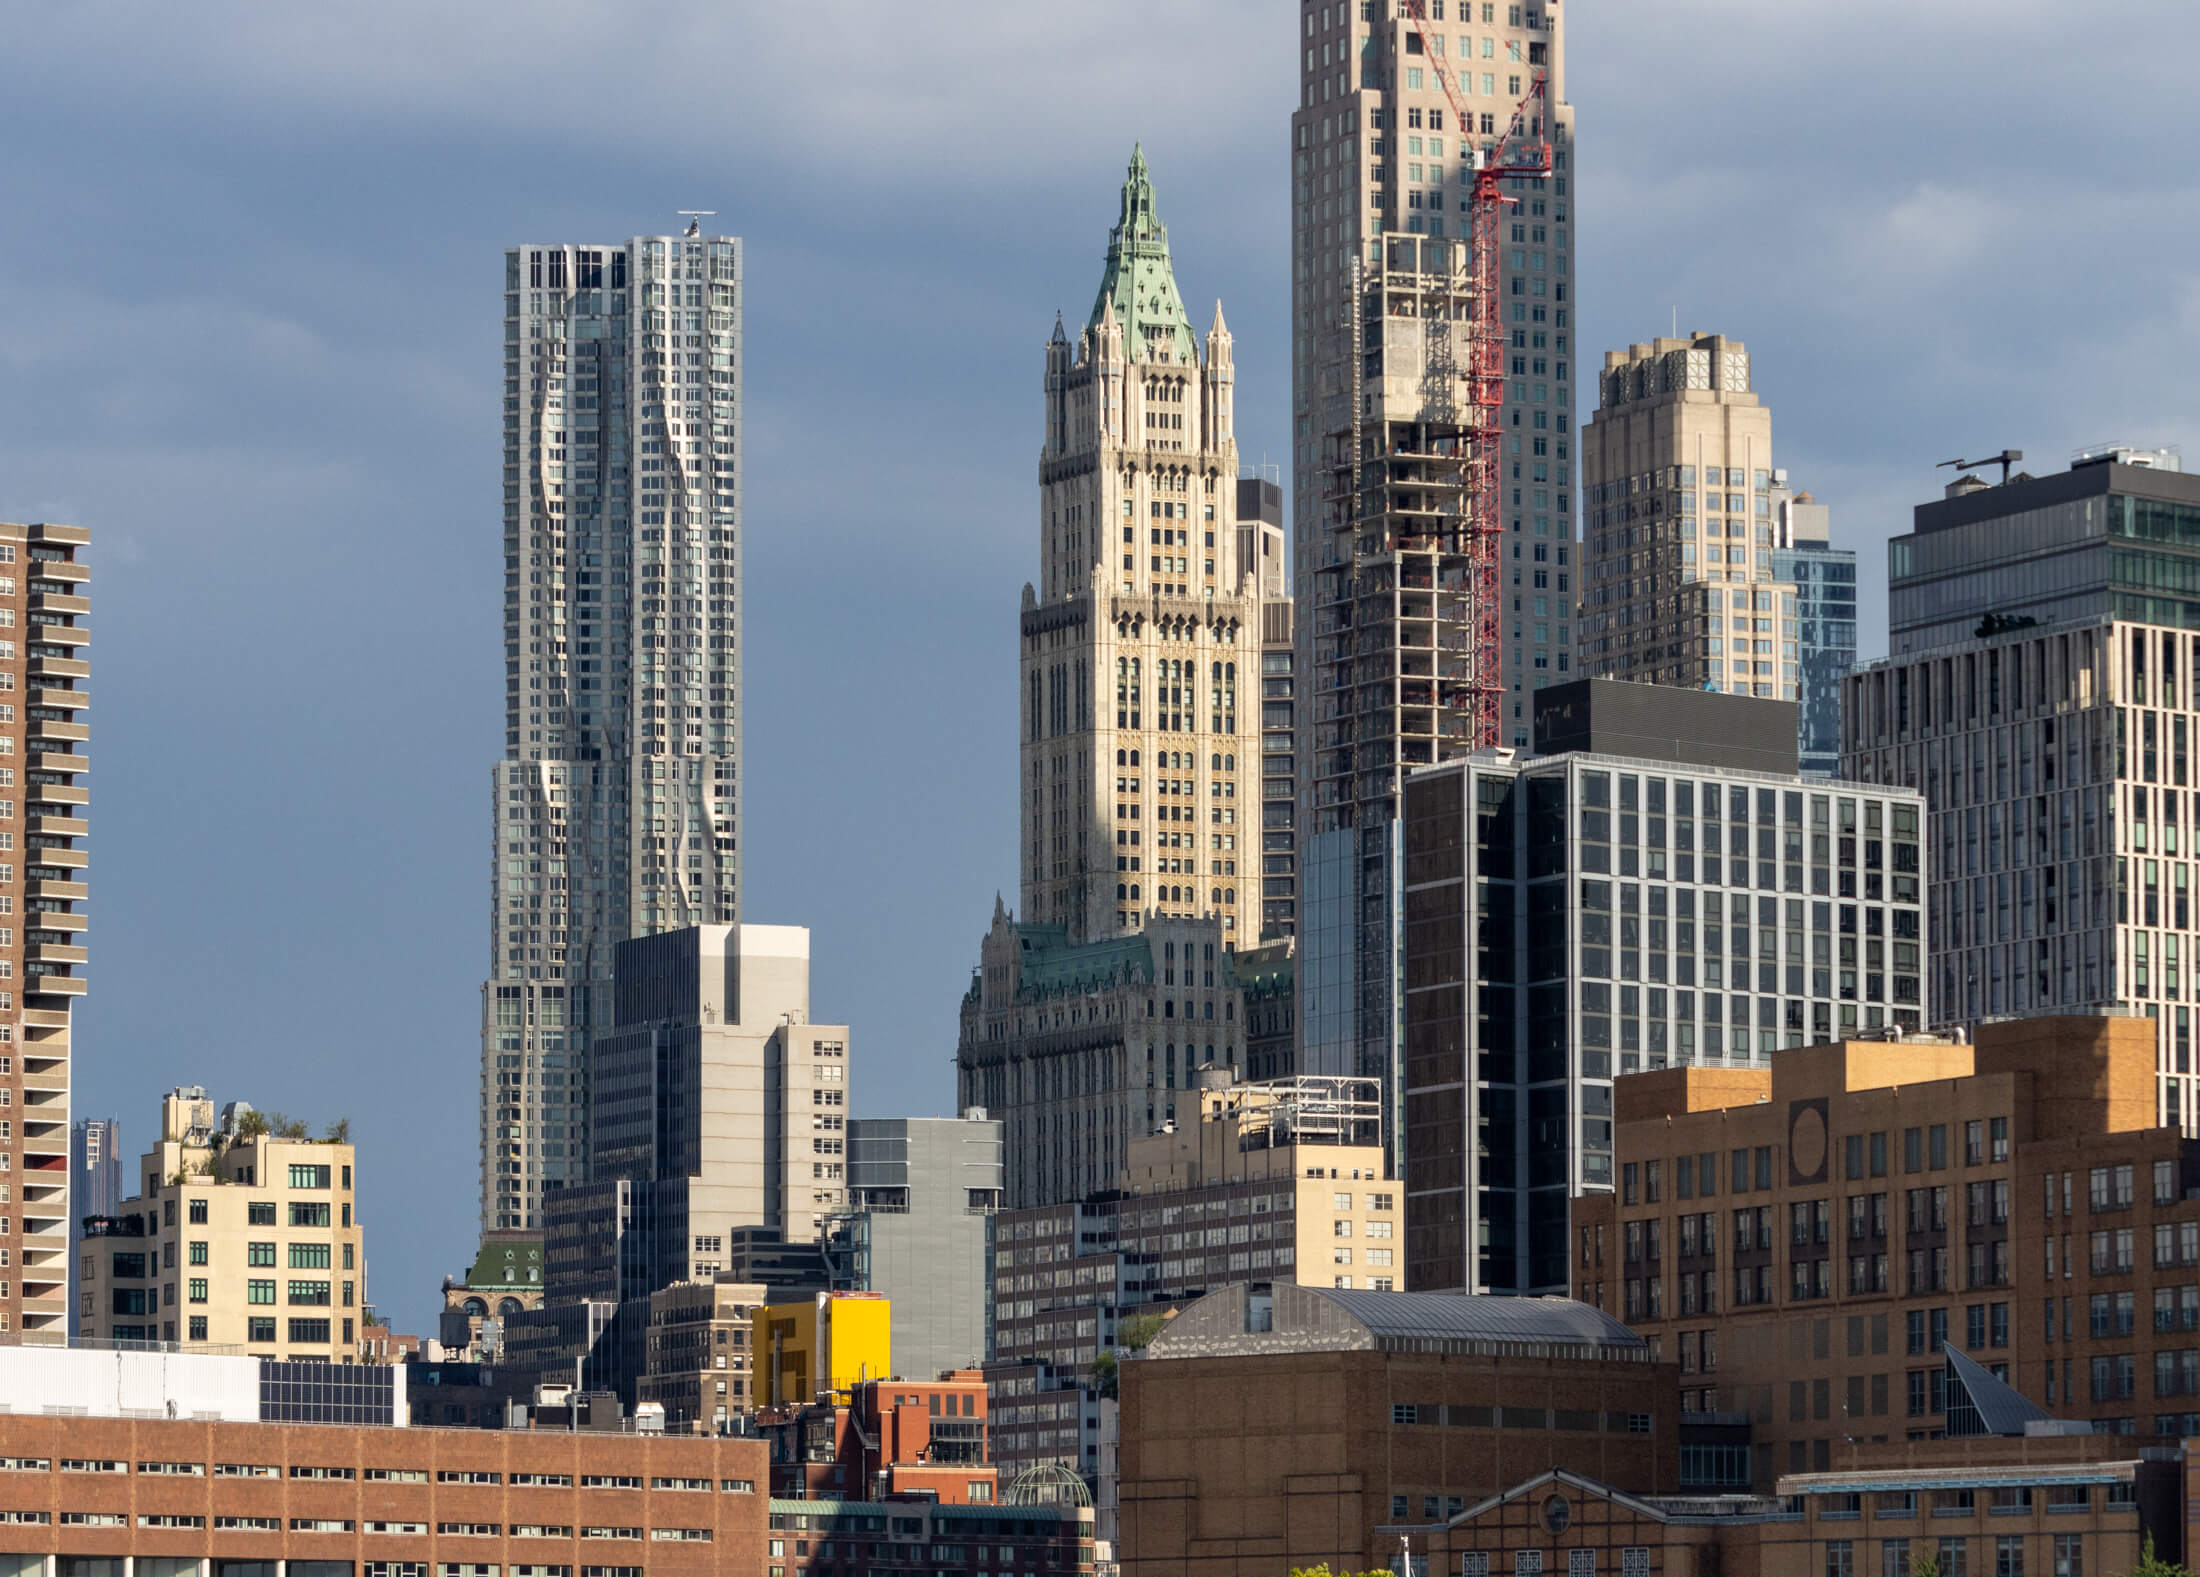 the manhattan skyline from the hudson river showing the wooolworth building surrounded by modern towers